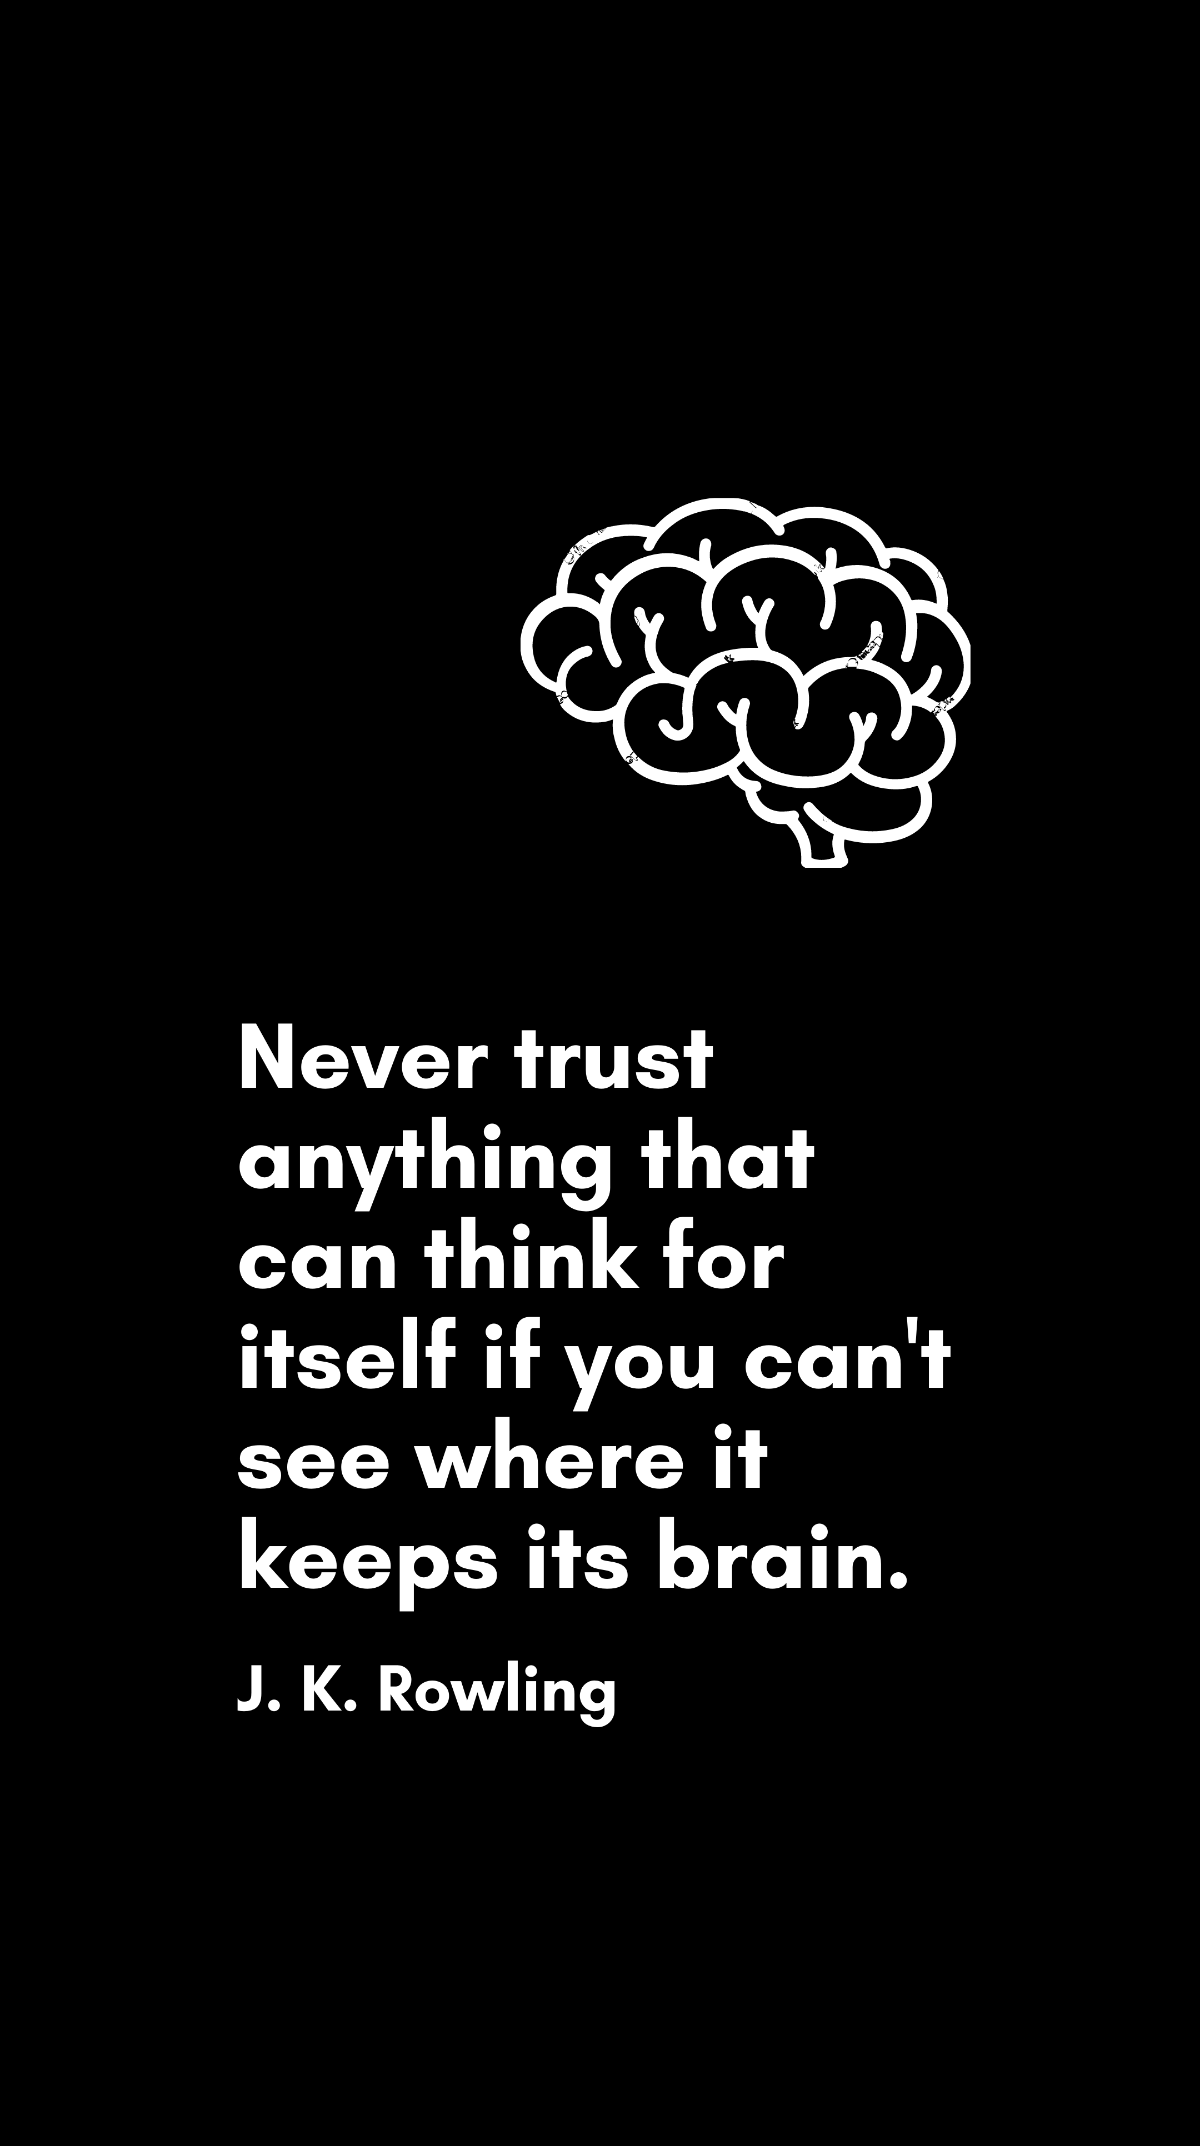 Free J. K. Rowling - Never trust anything that can think for itself if you can't see where it keeps its brain. Template